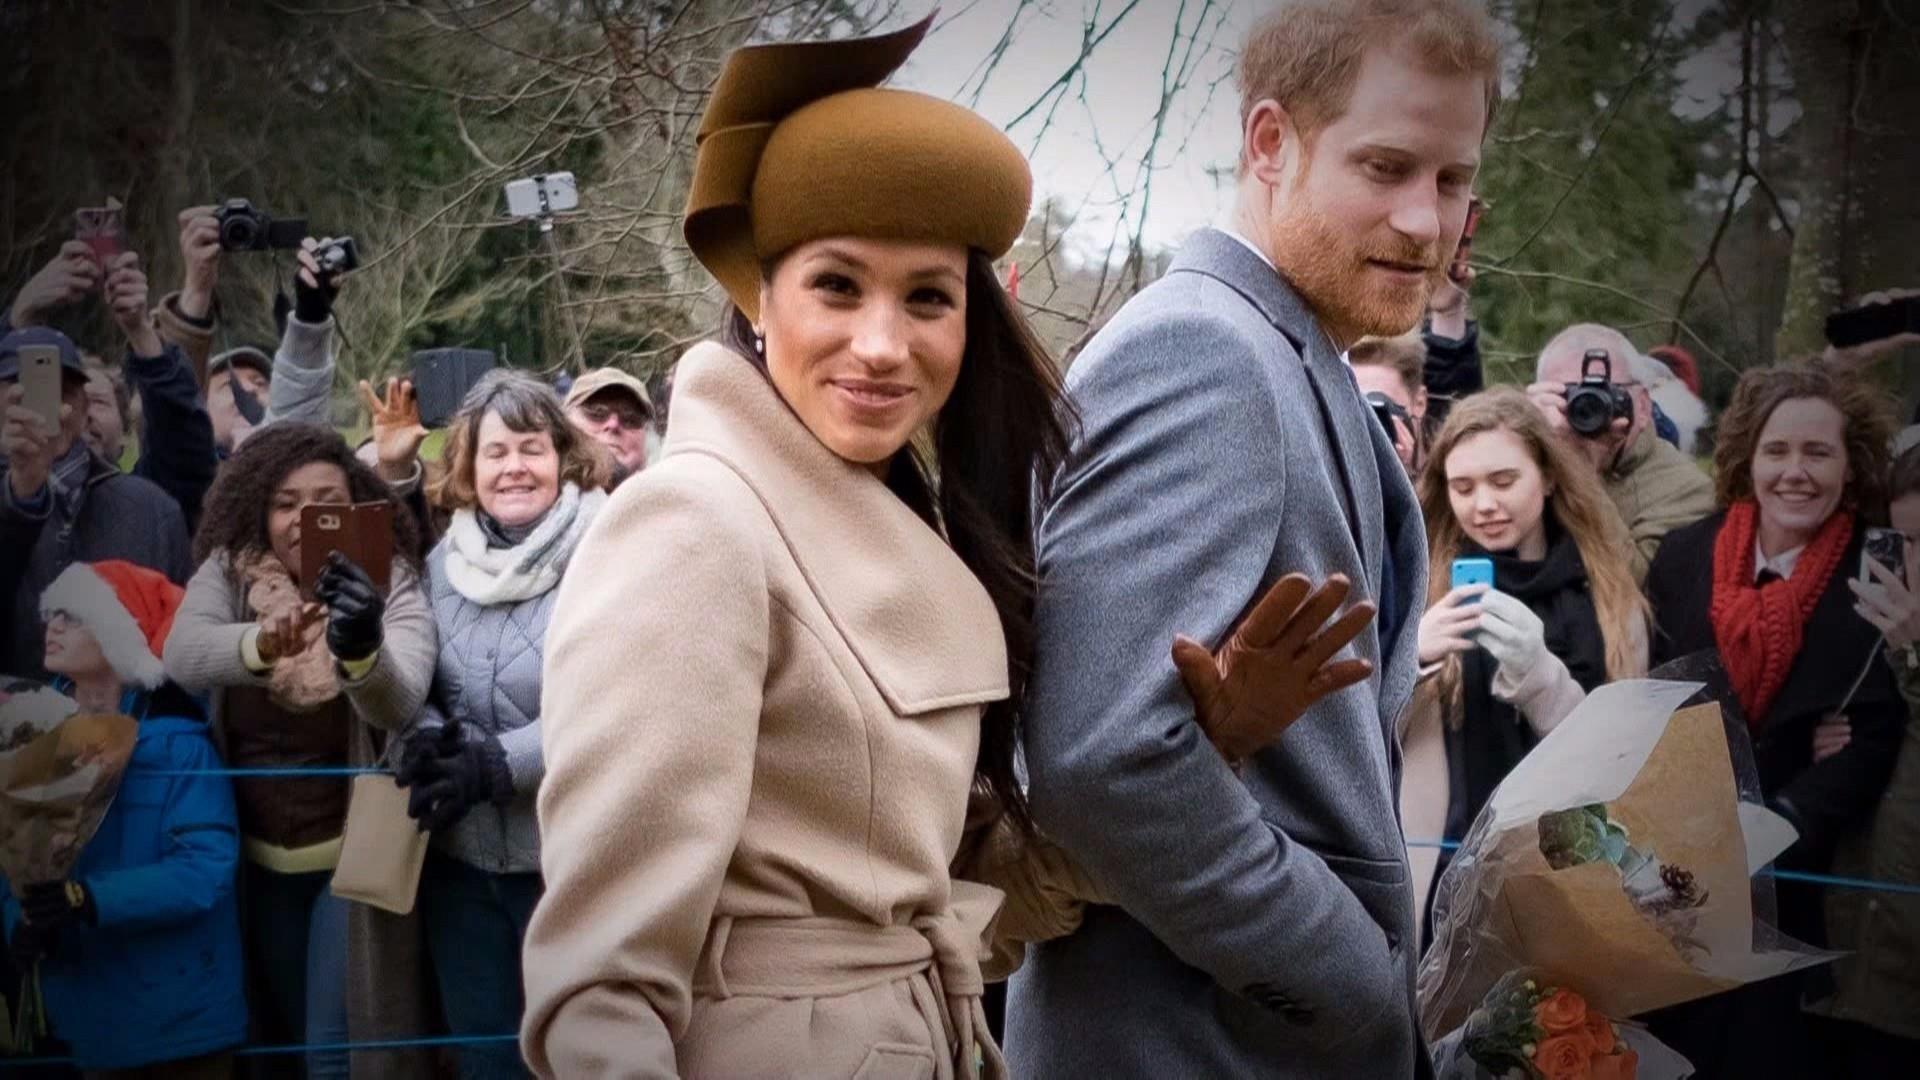 Meghan Markle celebrates her first Christmas with the royal family